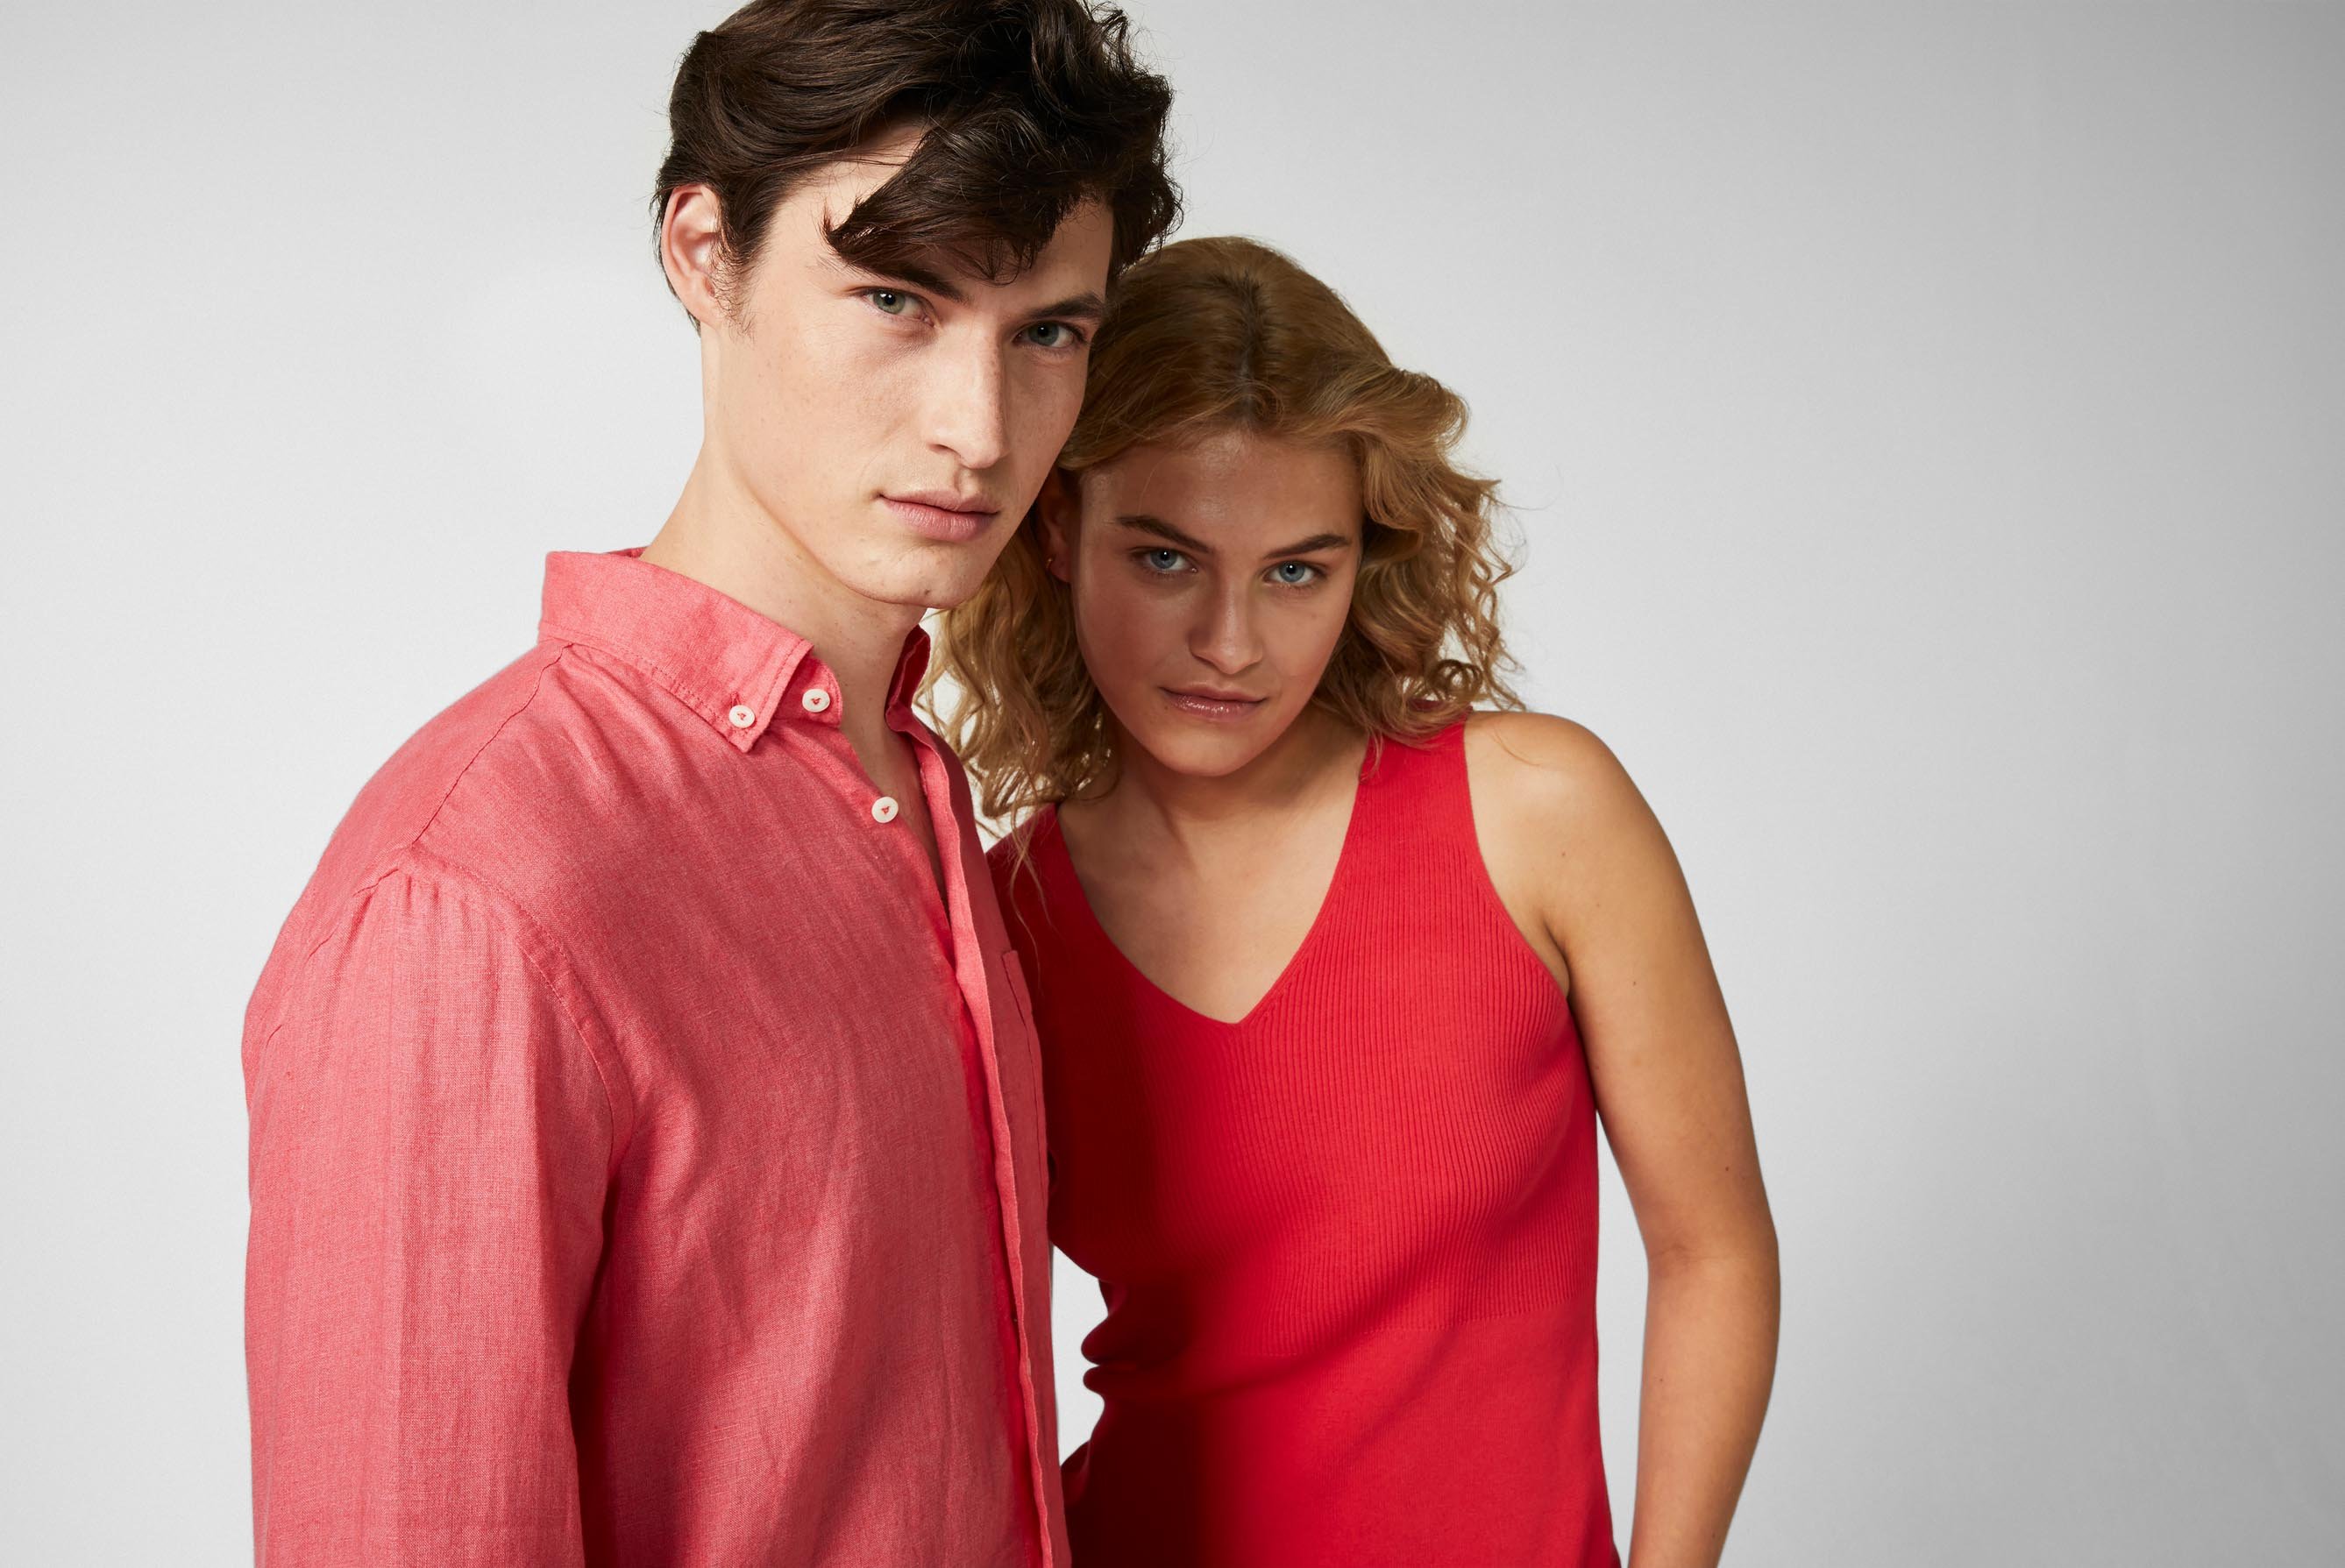 Tops & T-Shirts+Slim fit cotton tank top rot/rose+09.9966..S00192.540.M